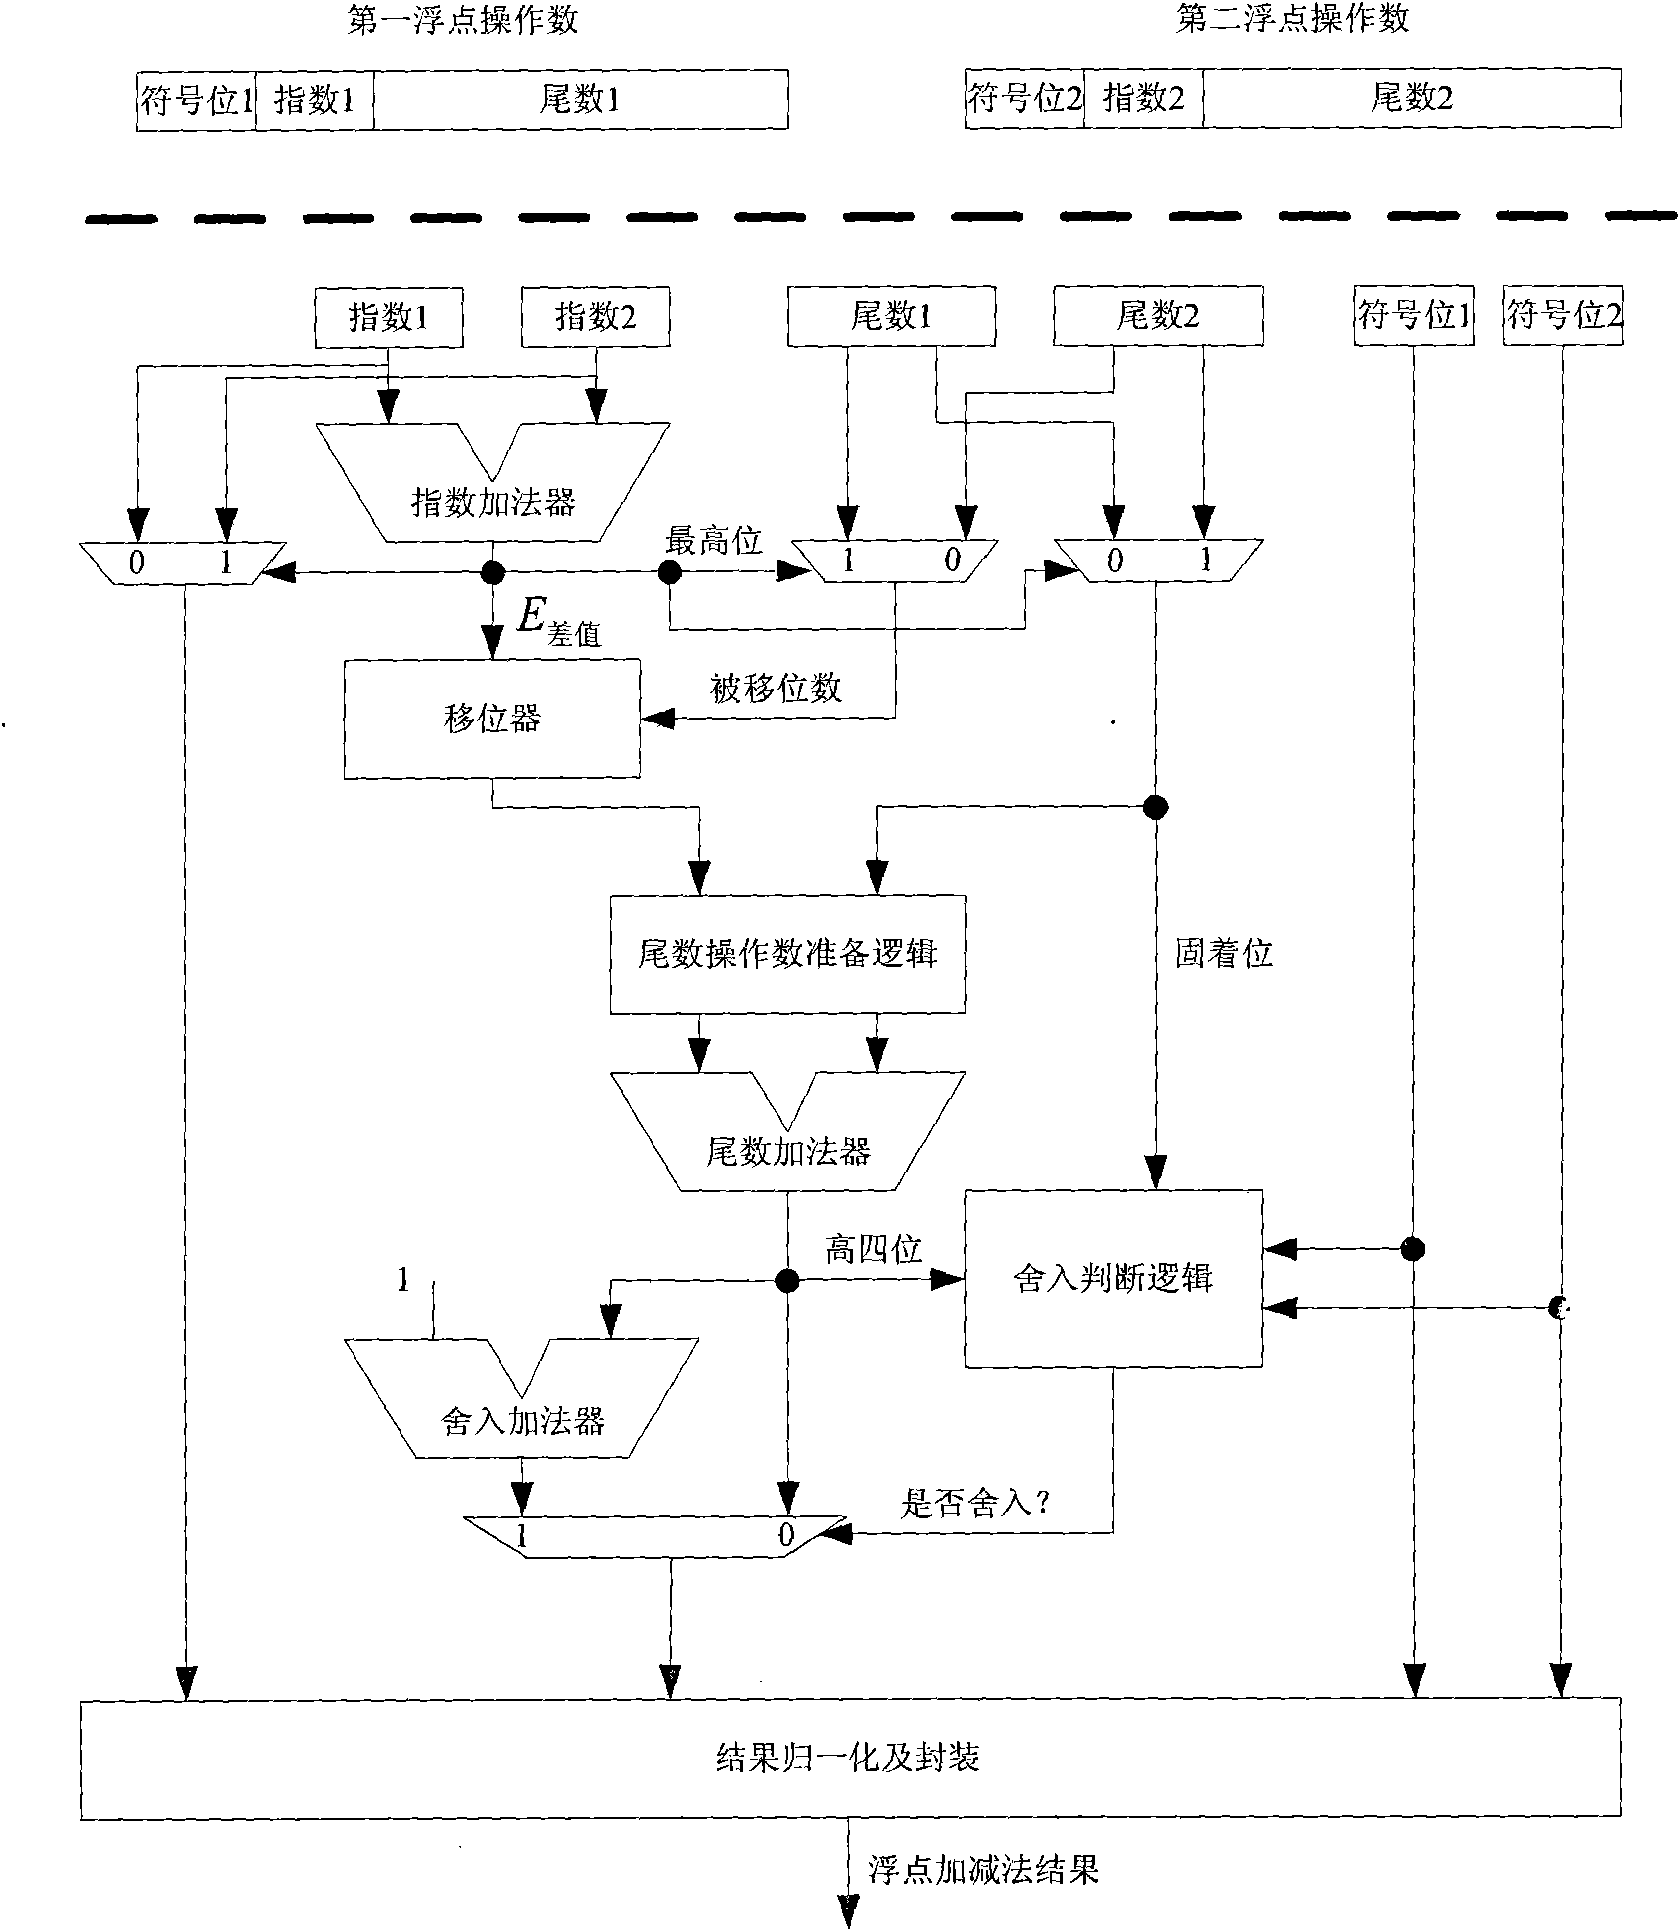 Floating point addition device based on complement rounding